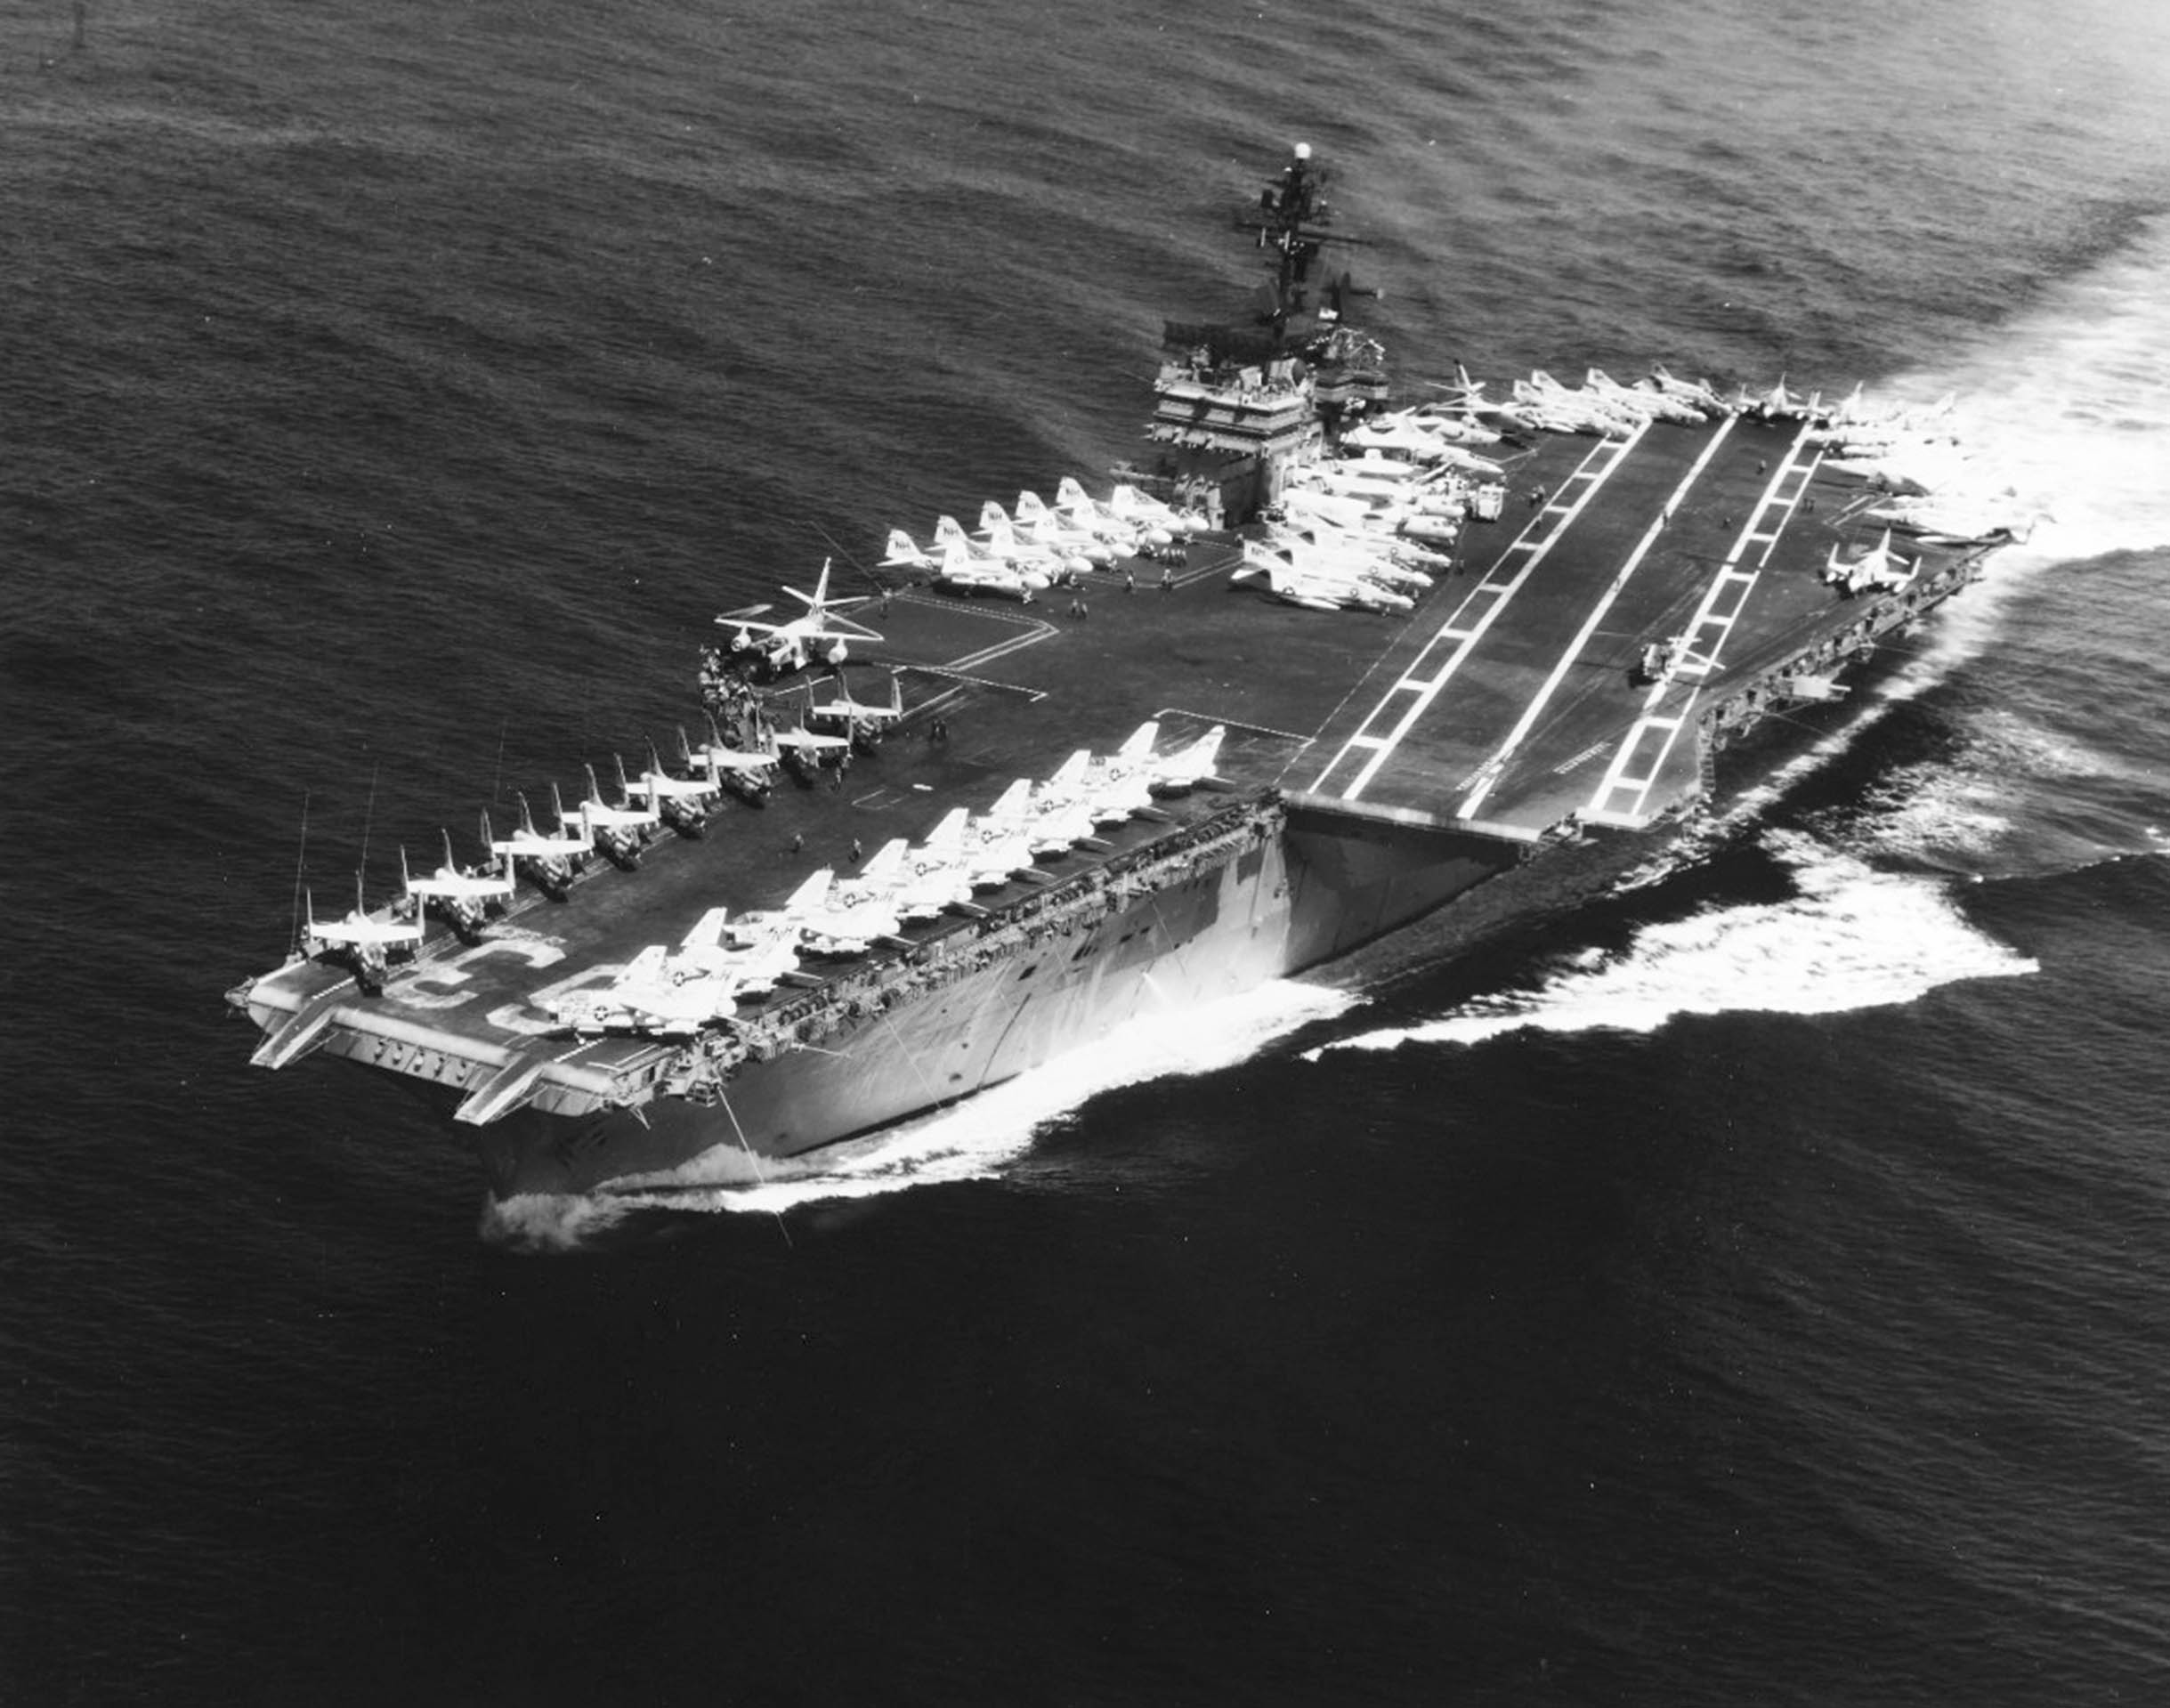 The Kitty Hawk Race Riot — Inside the Eruption of Violence That Engulfed a U.S. Navy Carrier